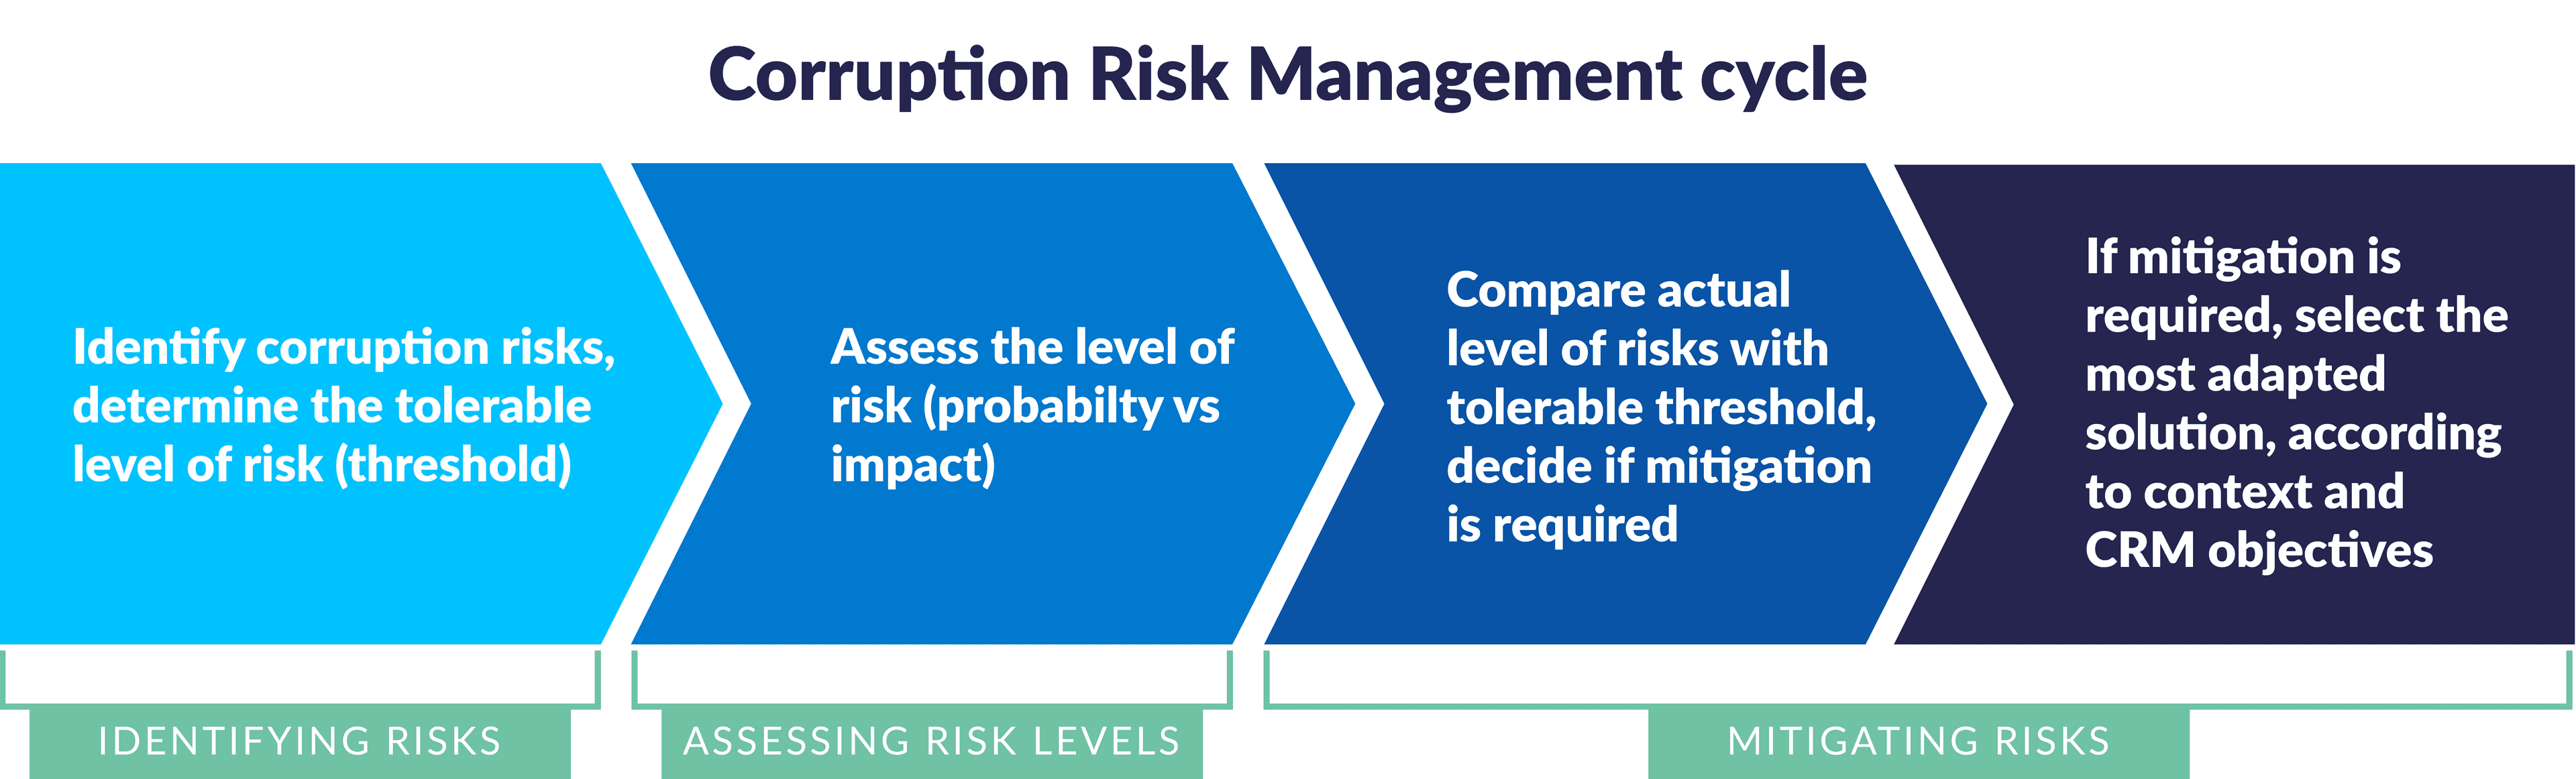 Illustration of the corruption risk management cycle. From identifying risks to assessing risk levels and mitigating risks.